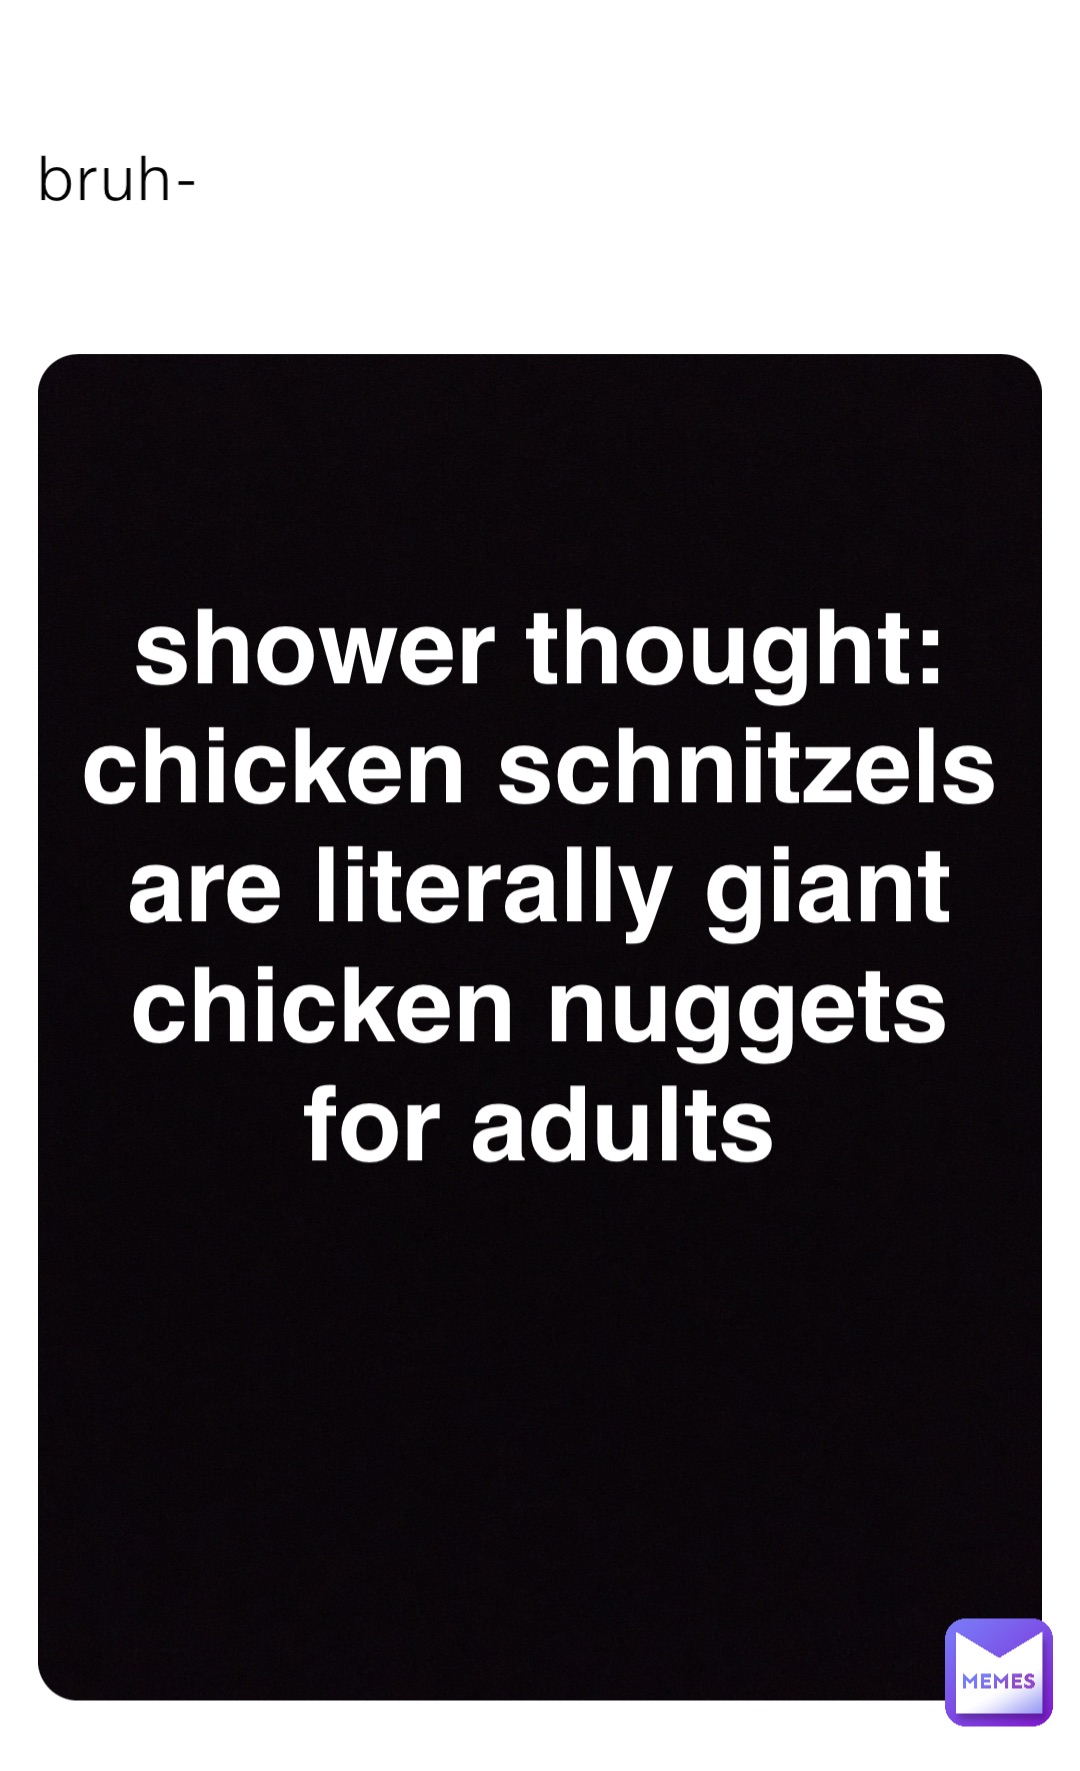 bruh- shower thought:
chicken schnitzels
are literally giant
chicken nuggets
for adults